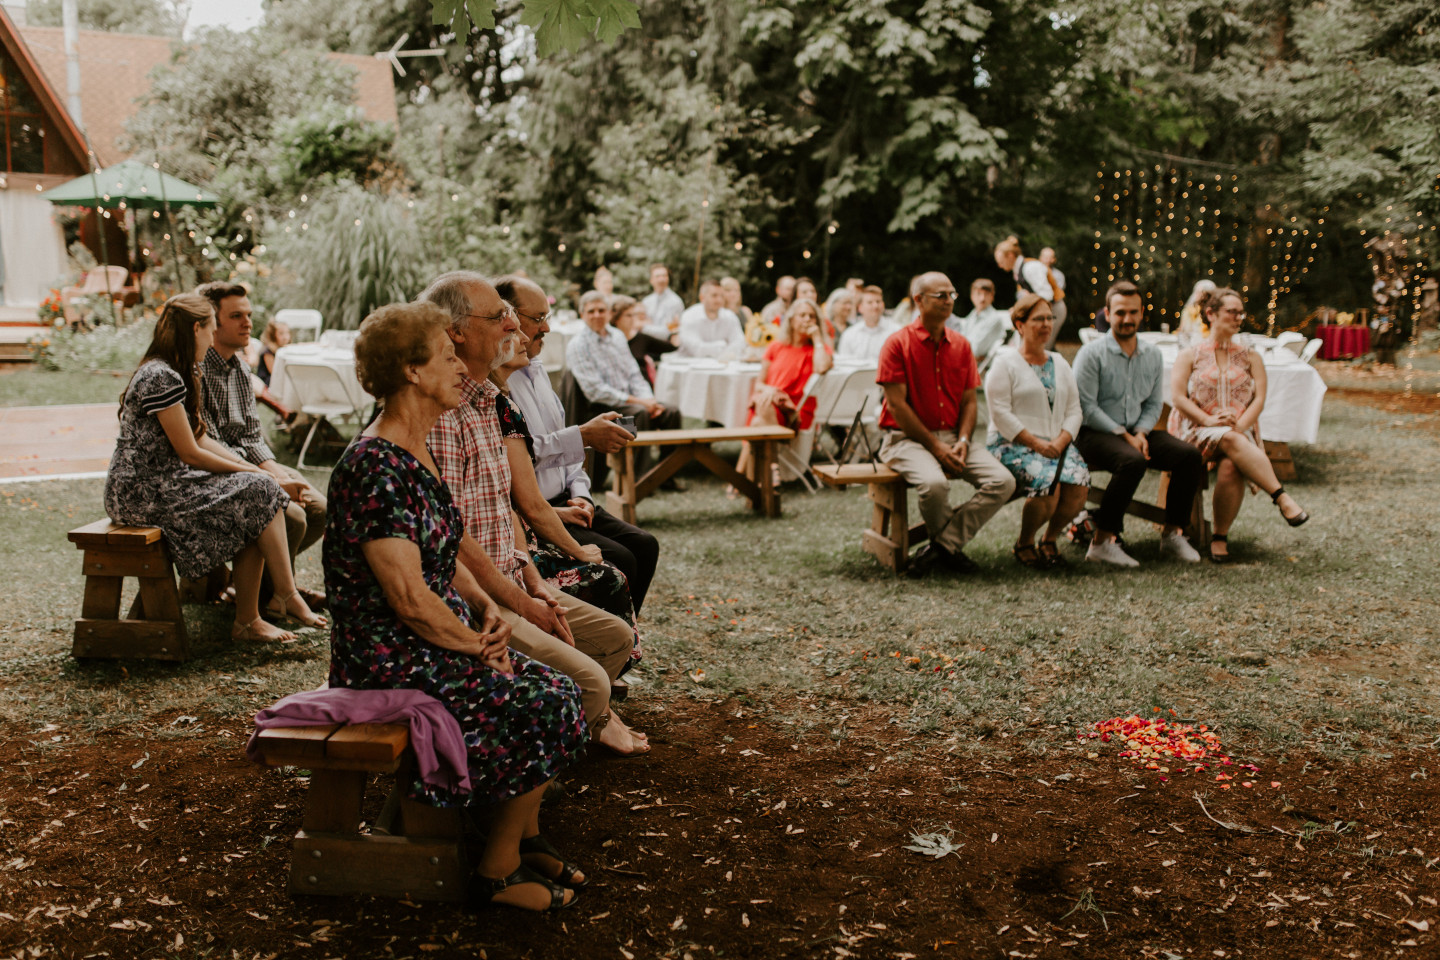 Guests look on at the wedding in Corvallis, Oregon. Intimate wedding photography in Corvallis Oregon by Sienna Plus Josh.